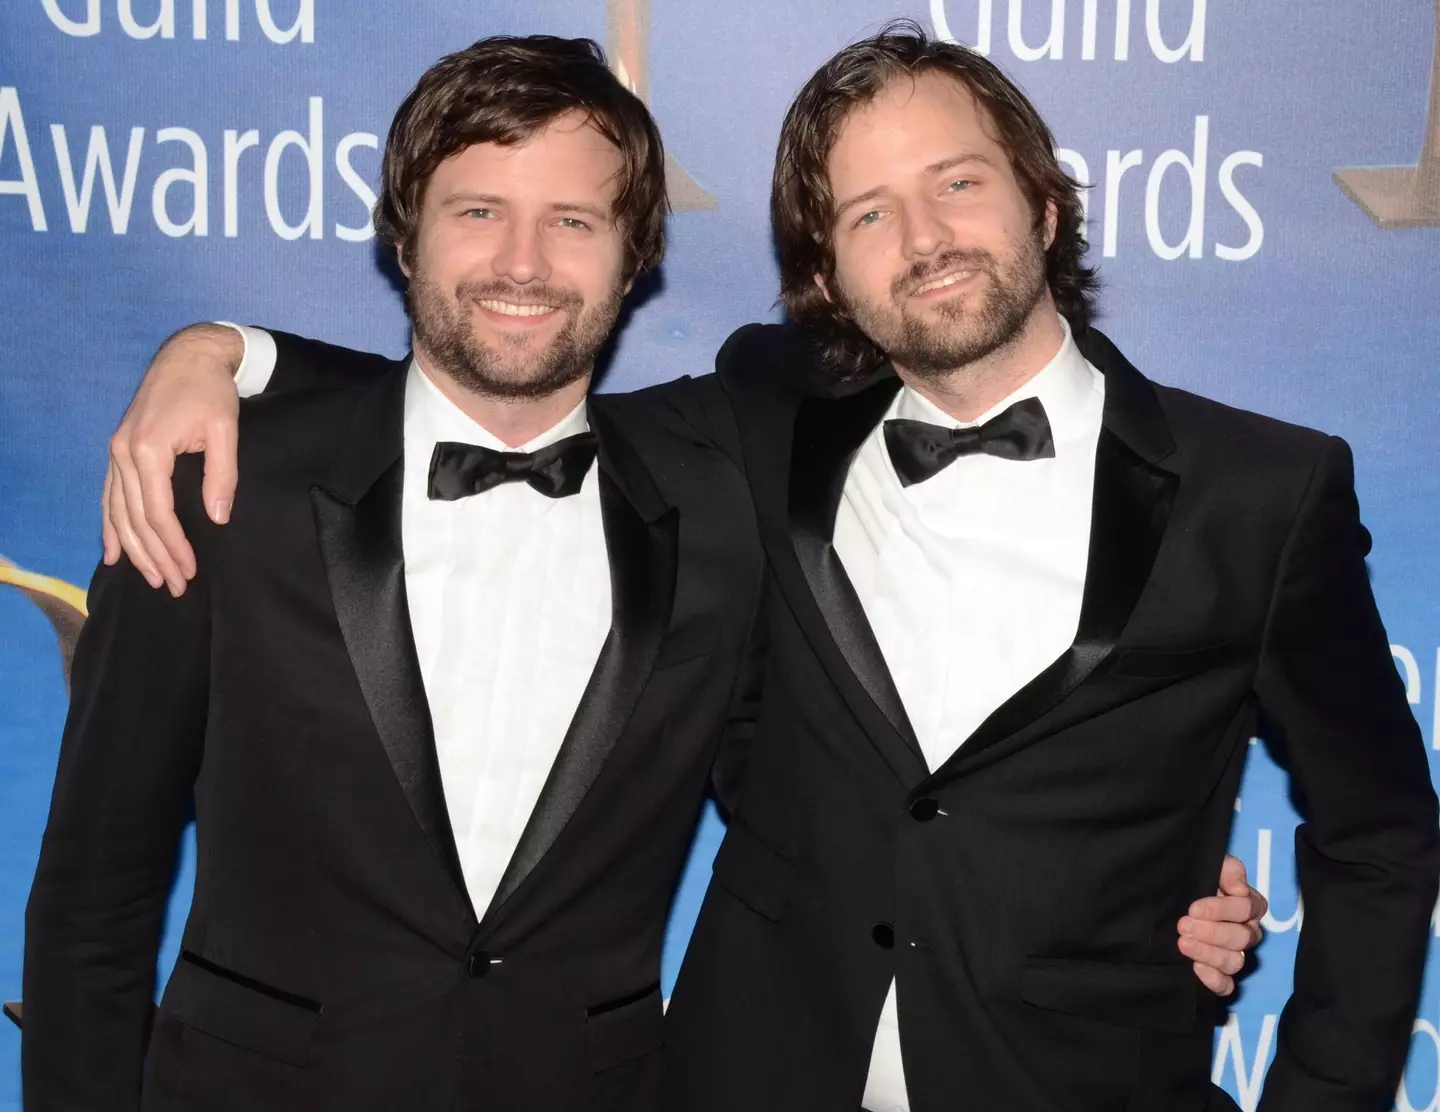 The Duffer Brothers admitted they had actually forgotten Will’s birthday.